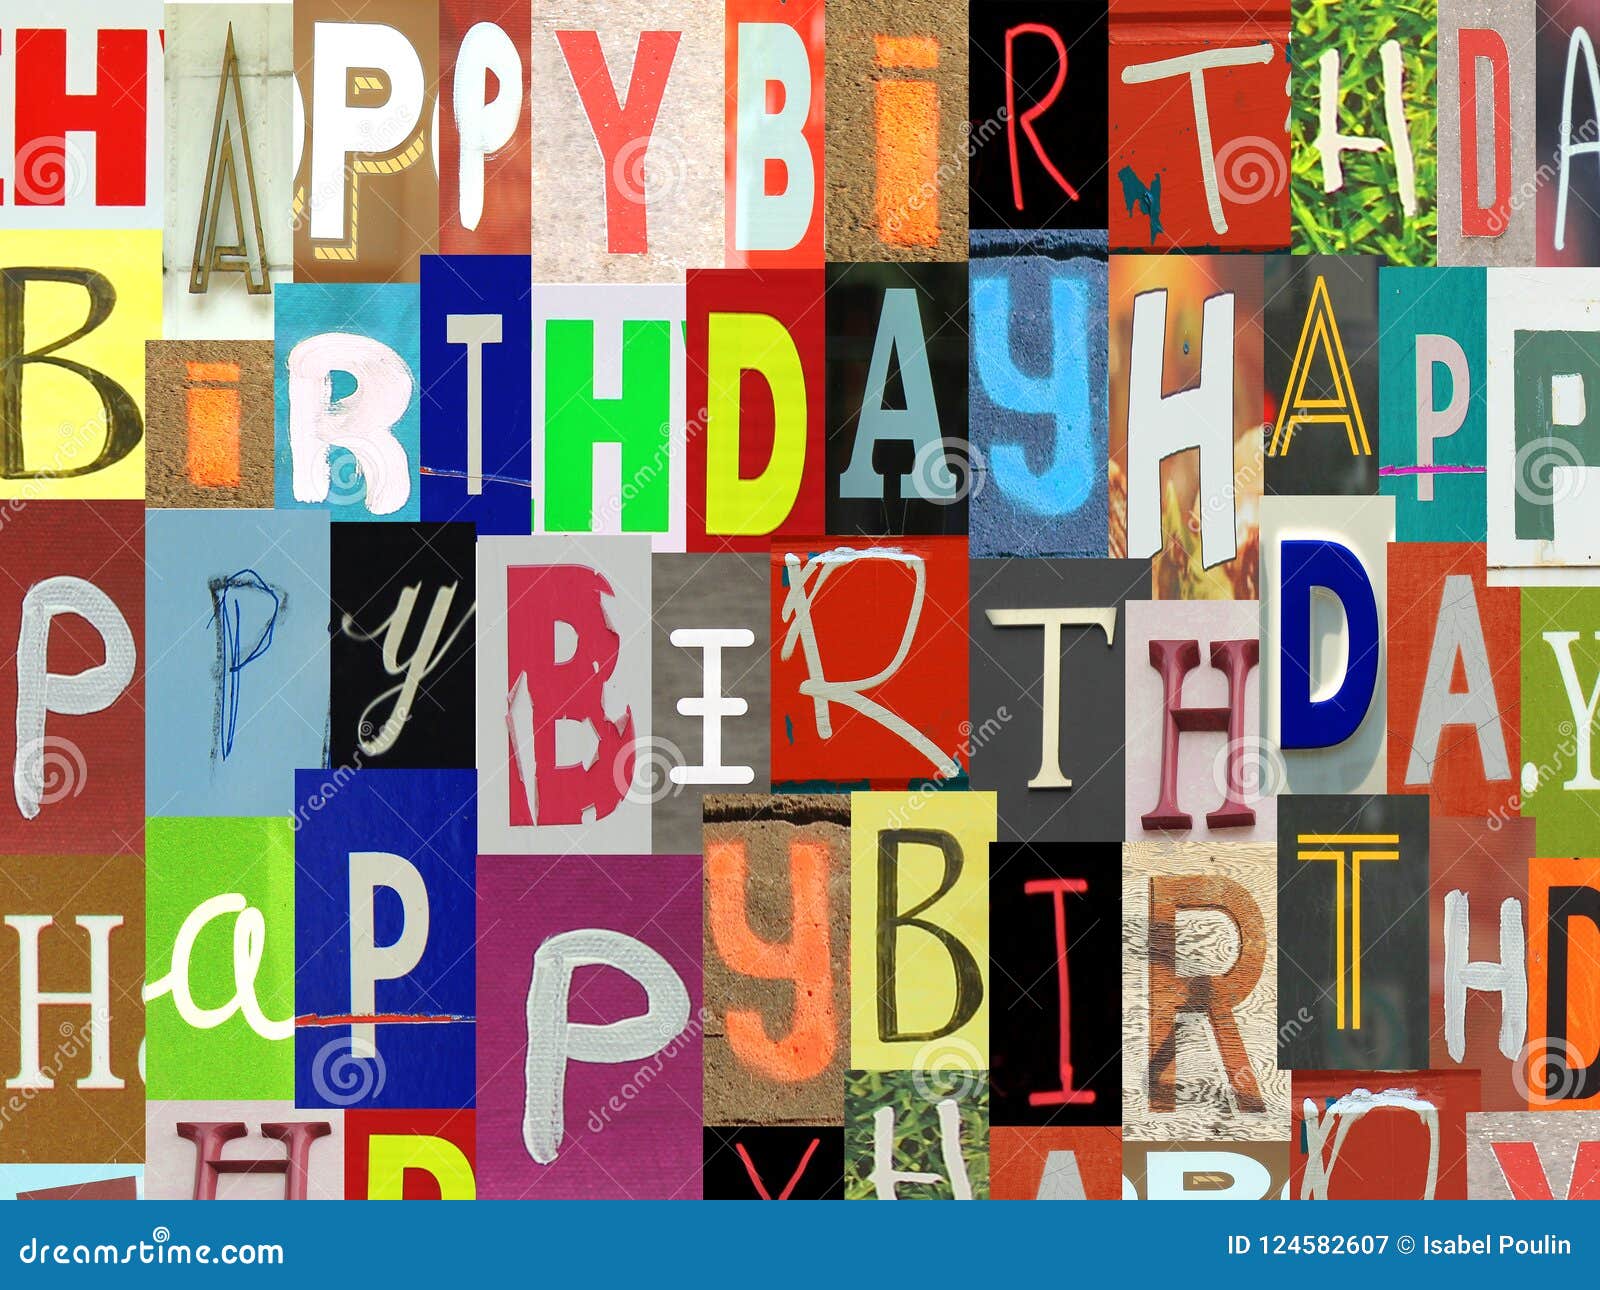 happy birthday words made of newspaper letters stock image image of